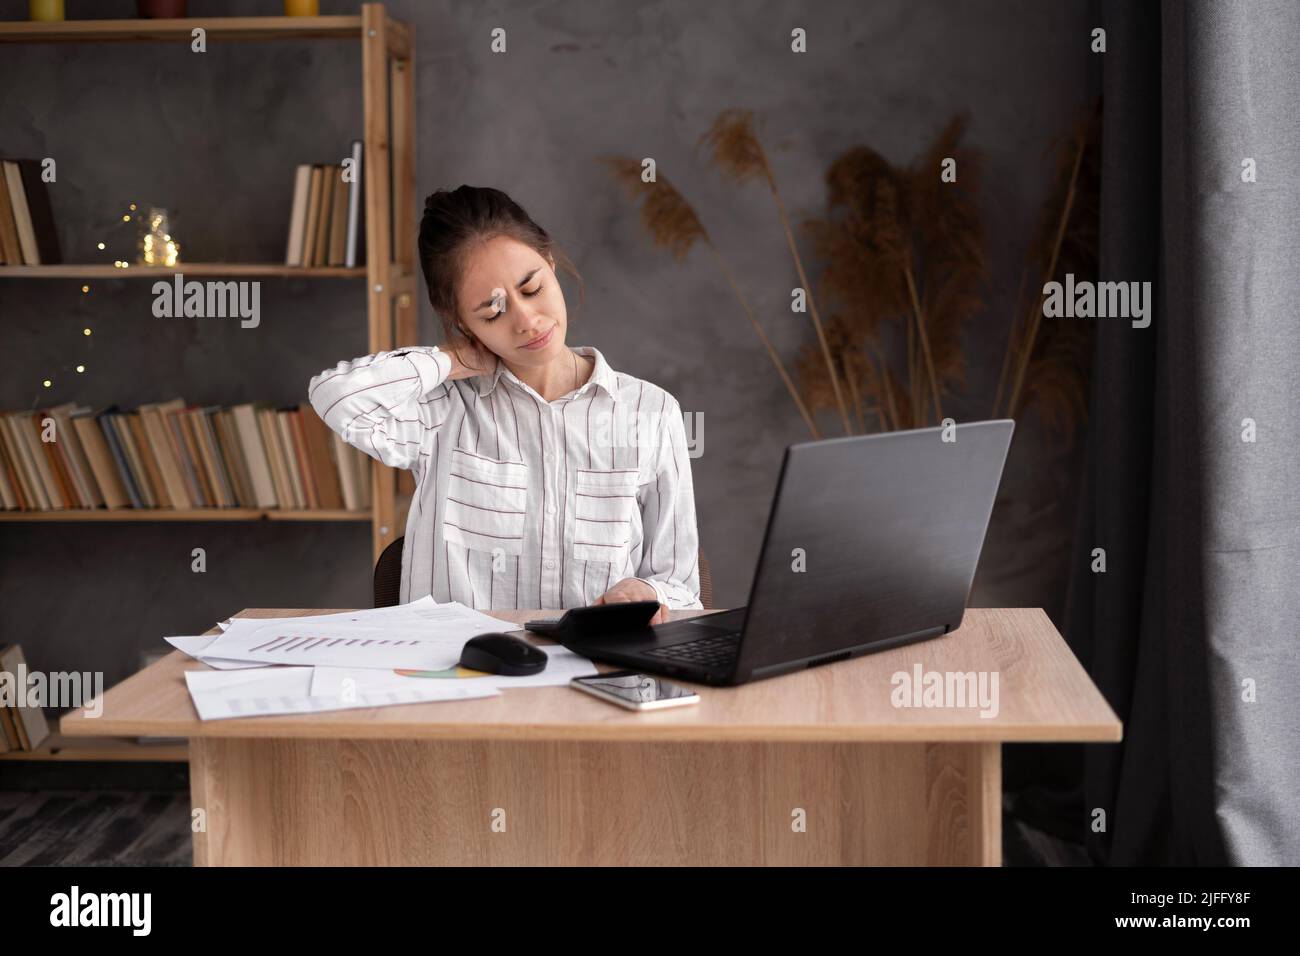 Business woman with neck ache, young woman suffering from neck pain in home office Stock Photo